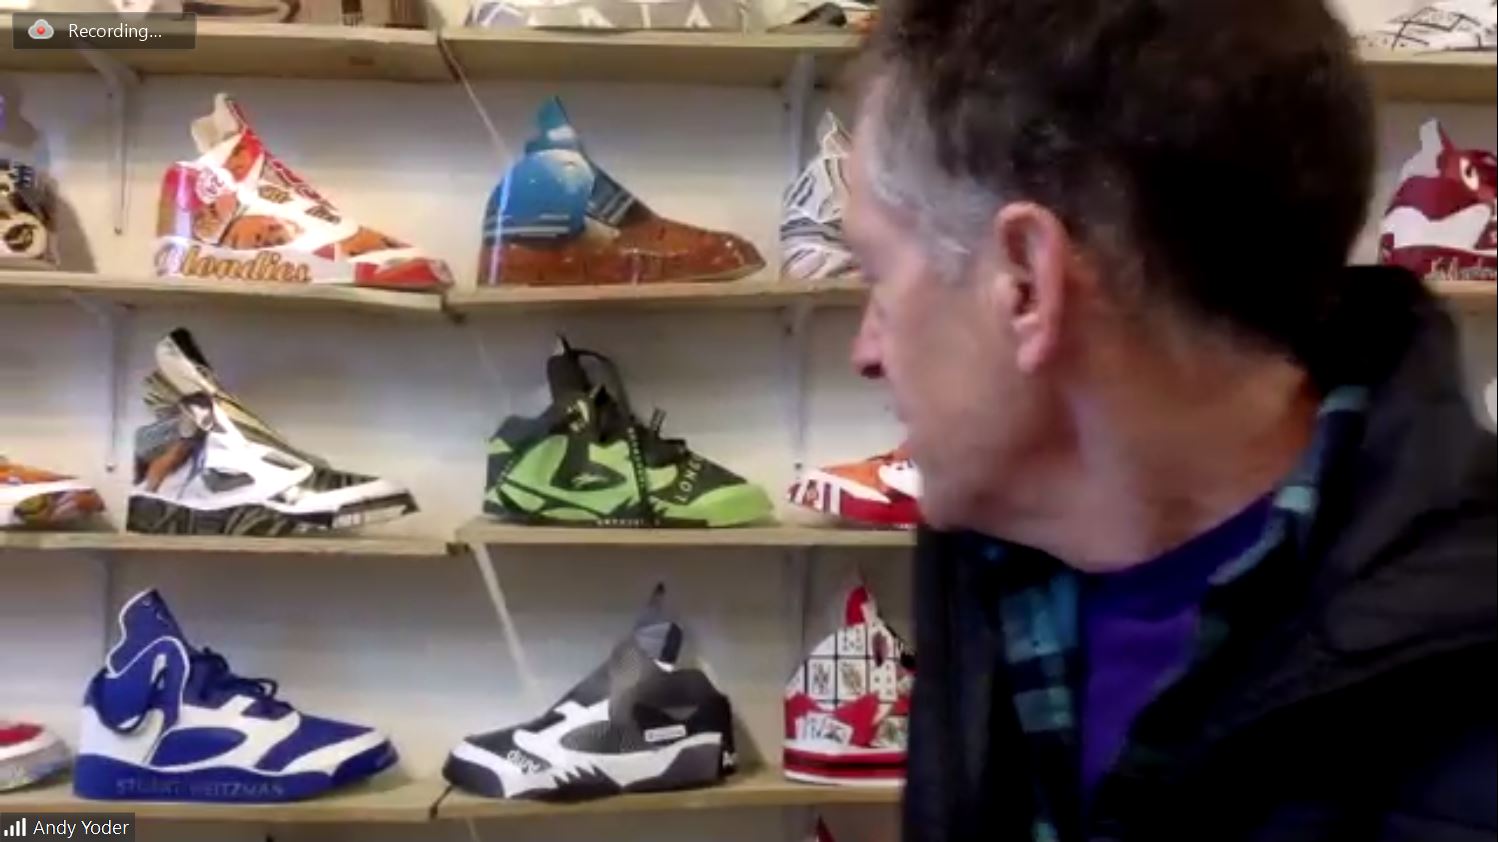 Man Speaking in front of shoe collection